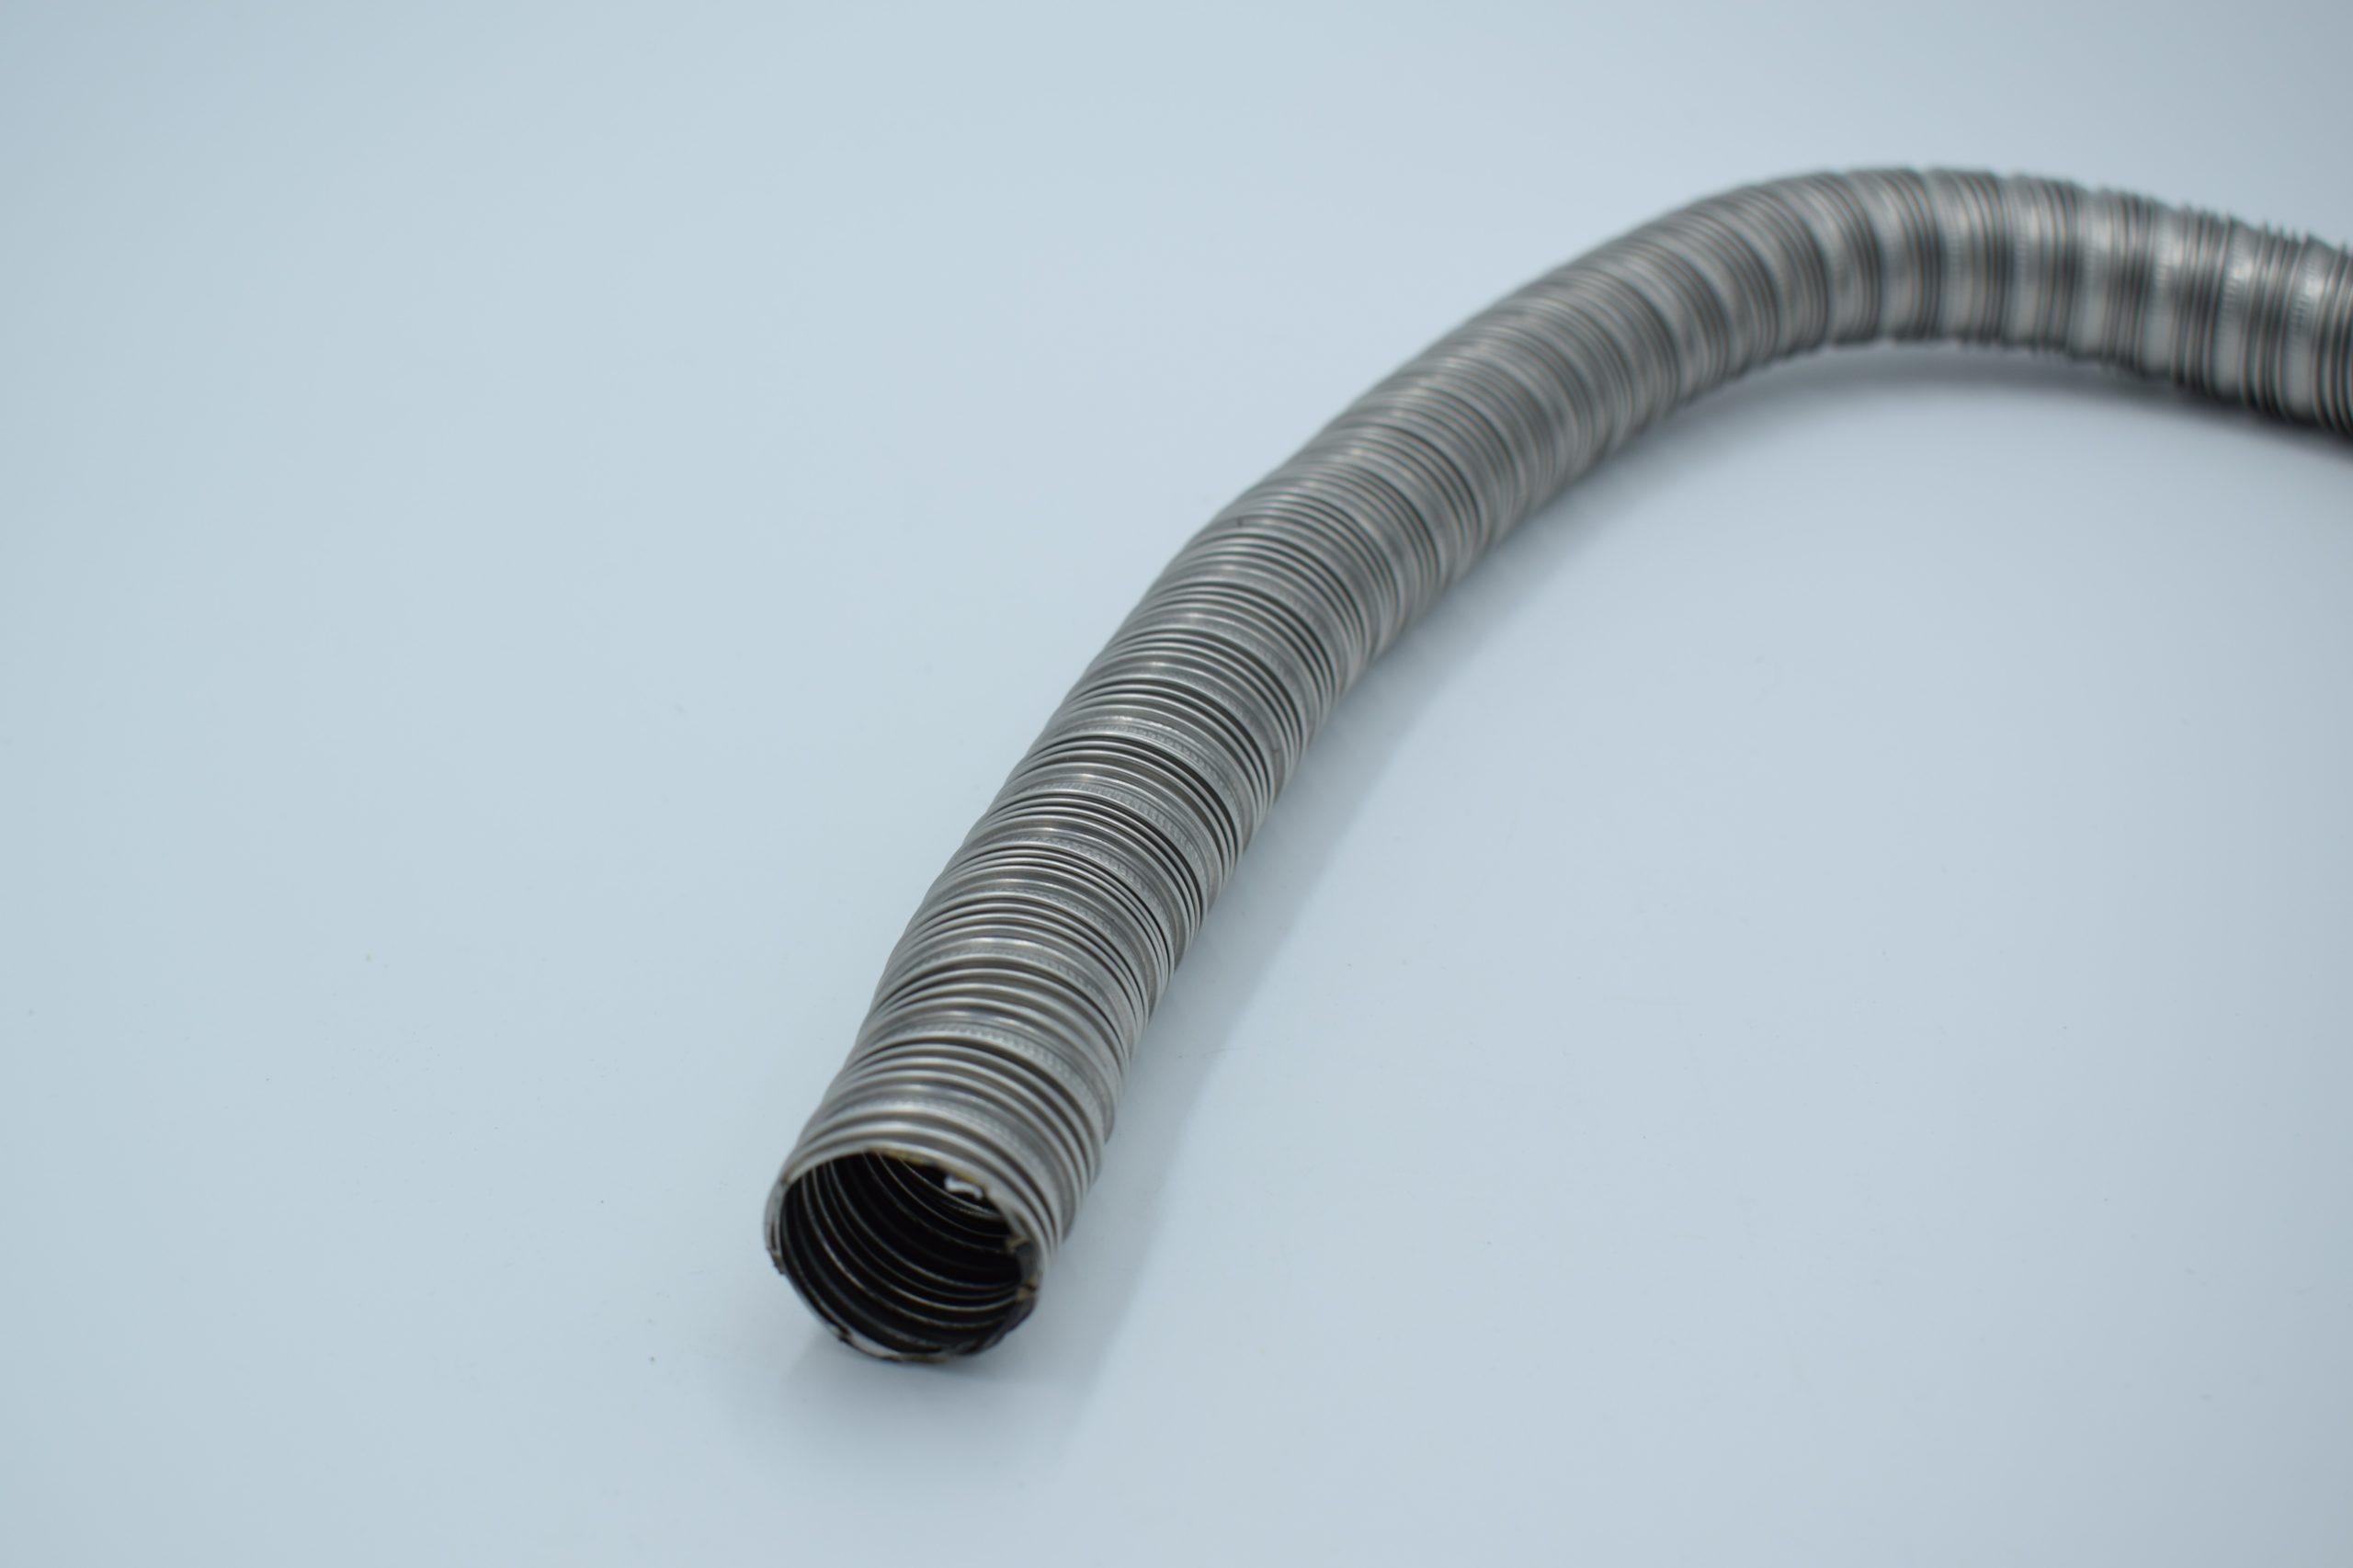 P24-011 Stainless Steel Exhaust Hose in 24 mm